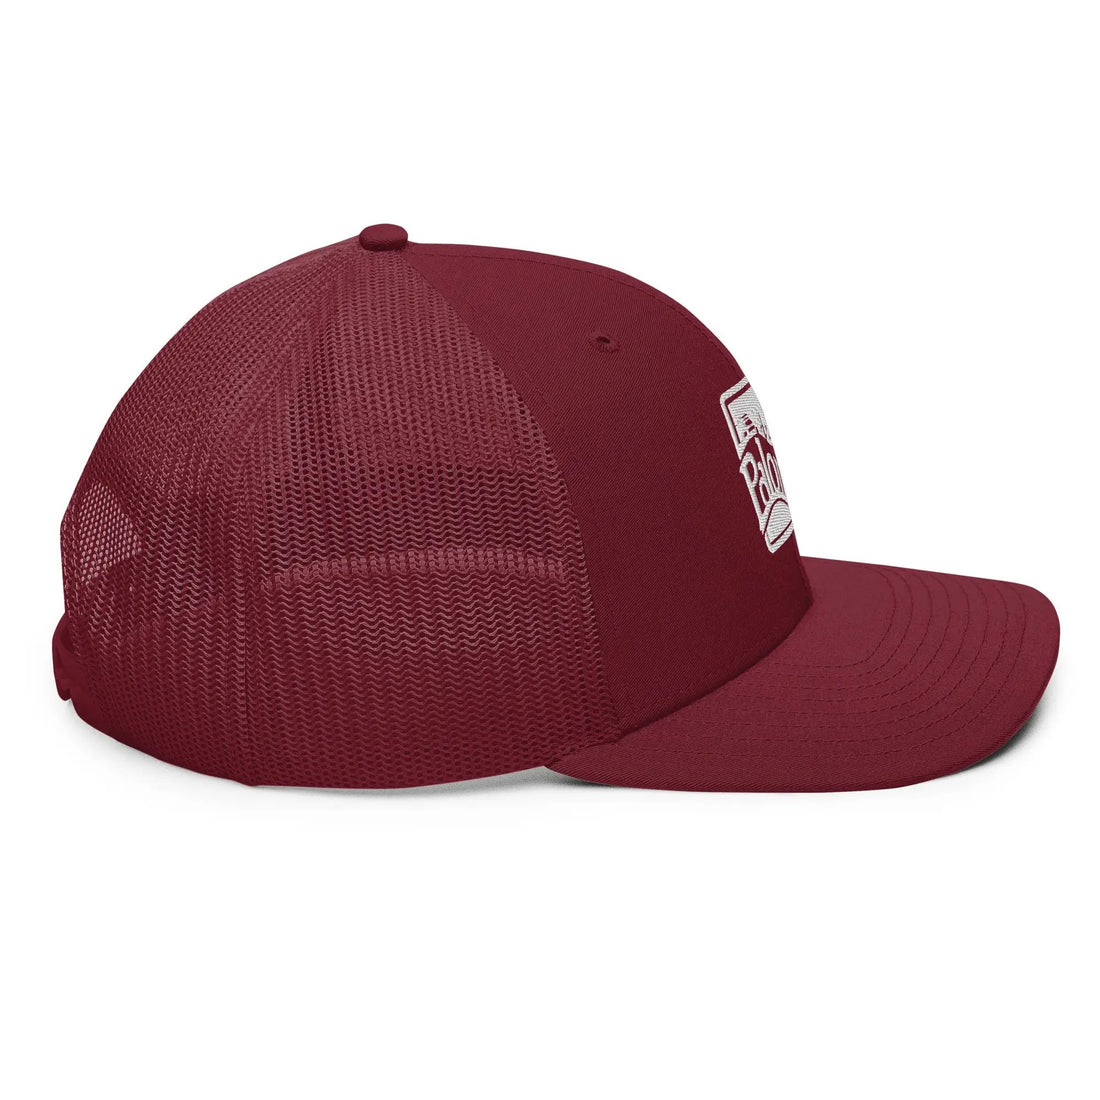 a maroon hat with a white patch on the front